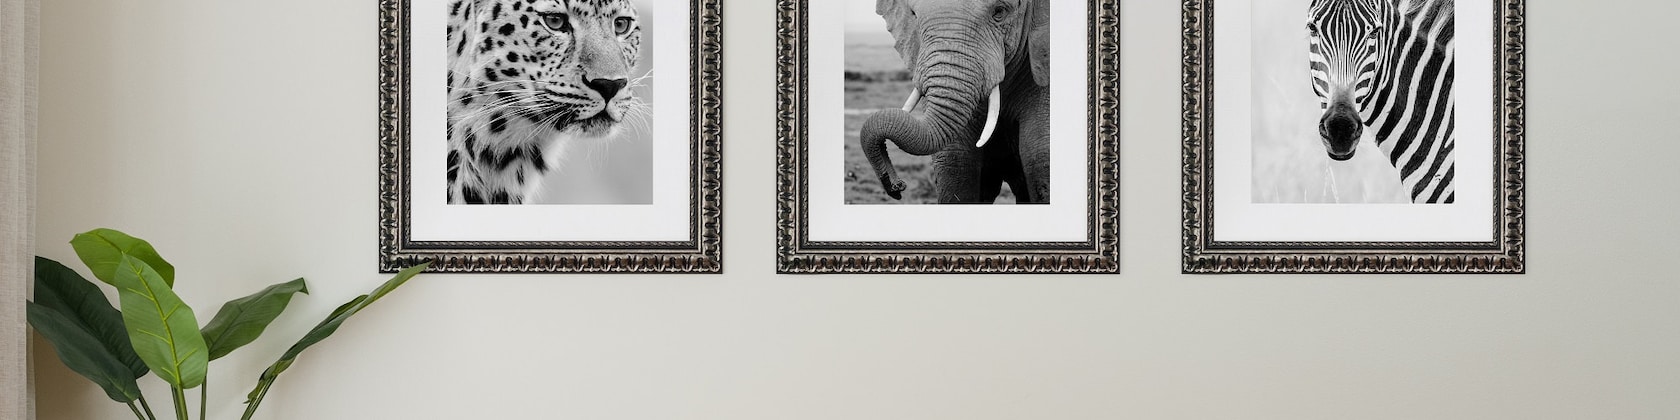 Shop Stylish Picture Frames for Every Space at Craig Frames - Your